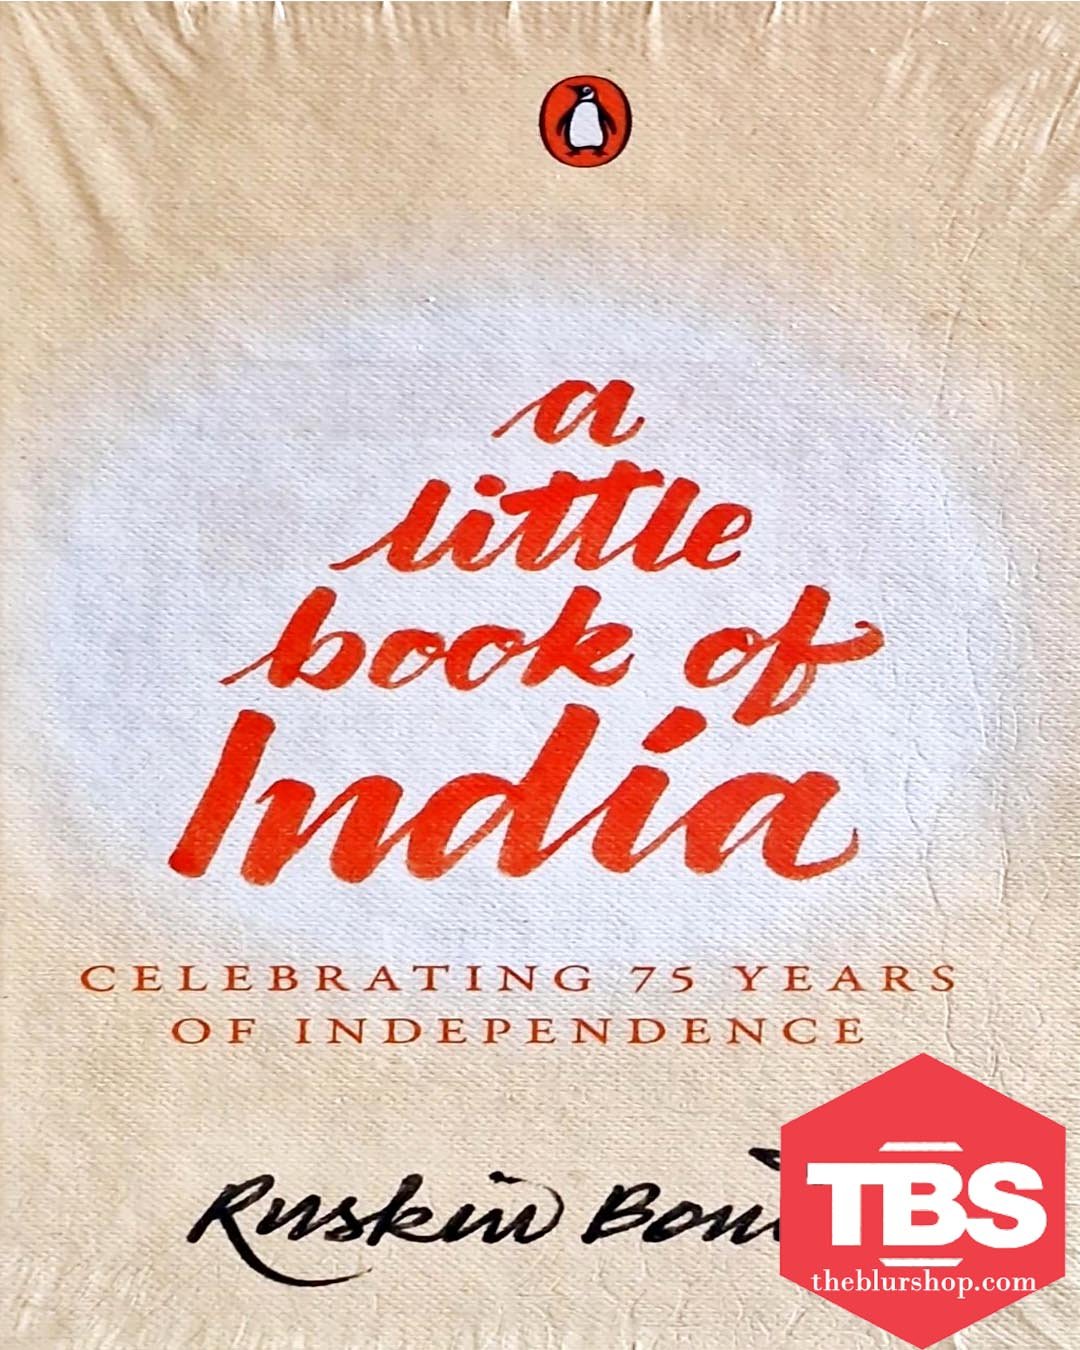 A Little Book of India